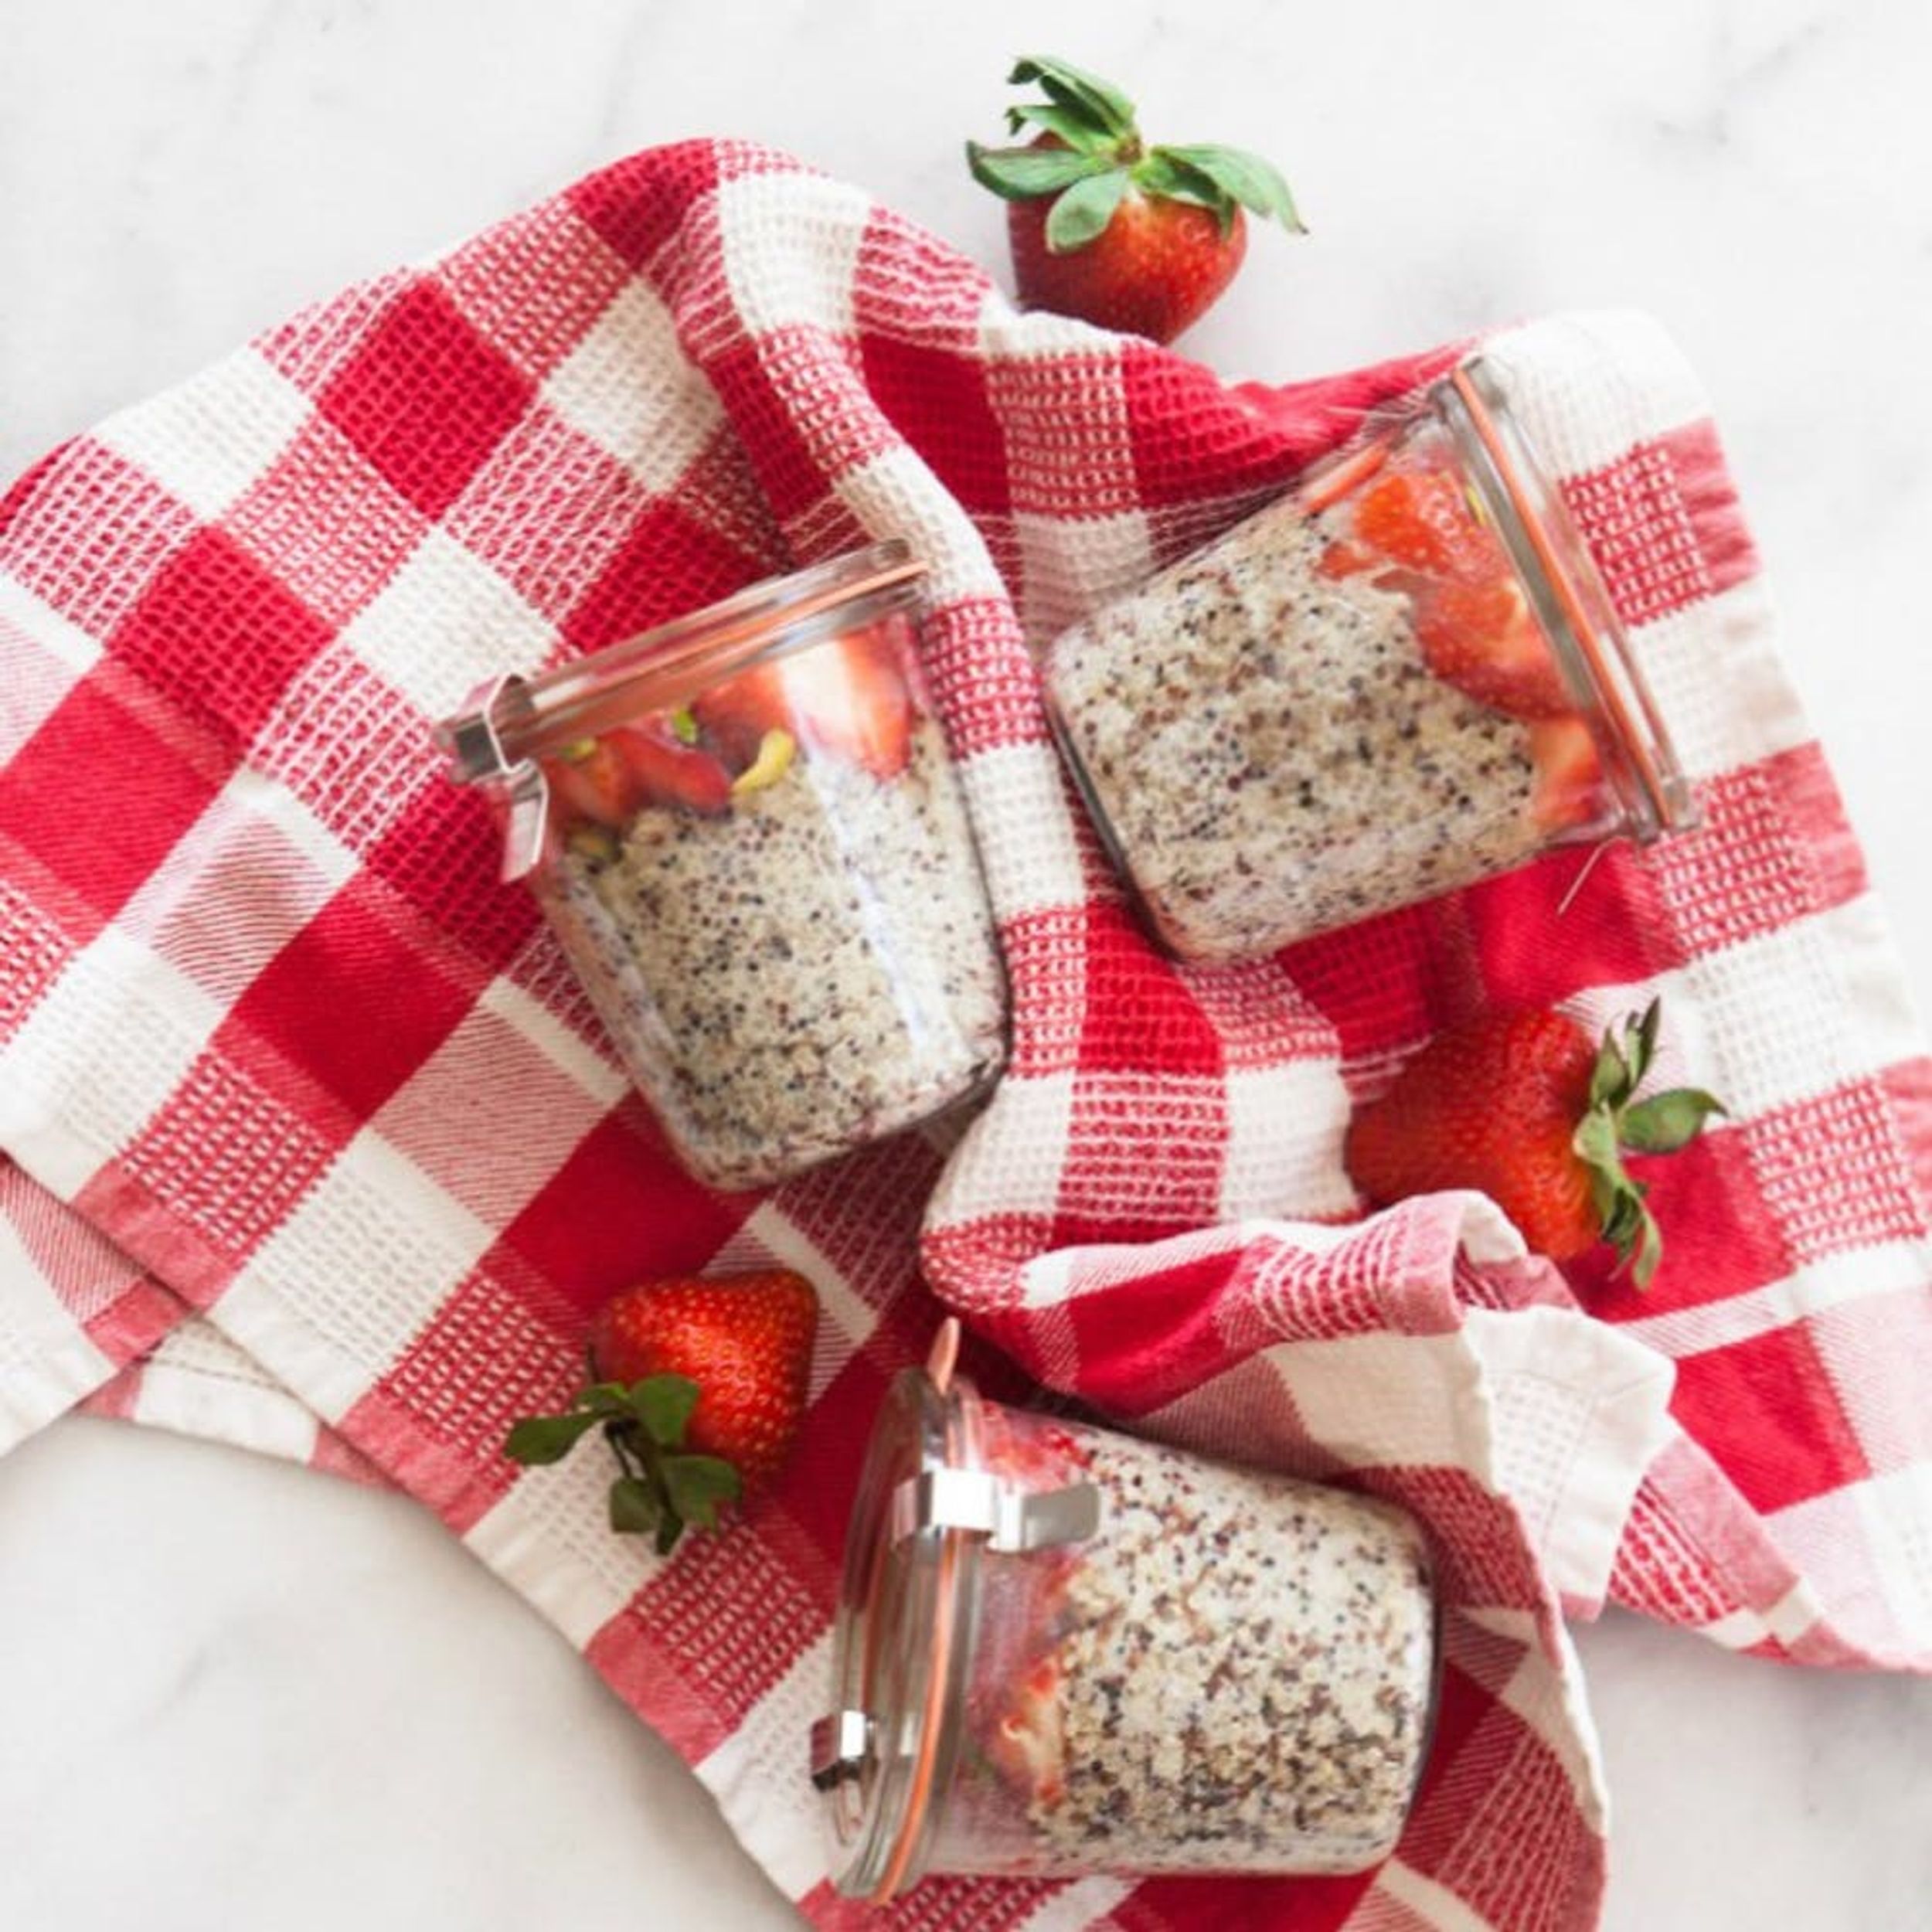 13 Perfectly Portable Snacks for Healthy Holiday Travels